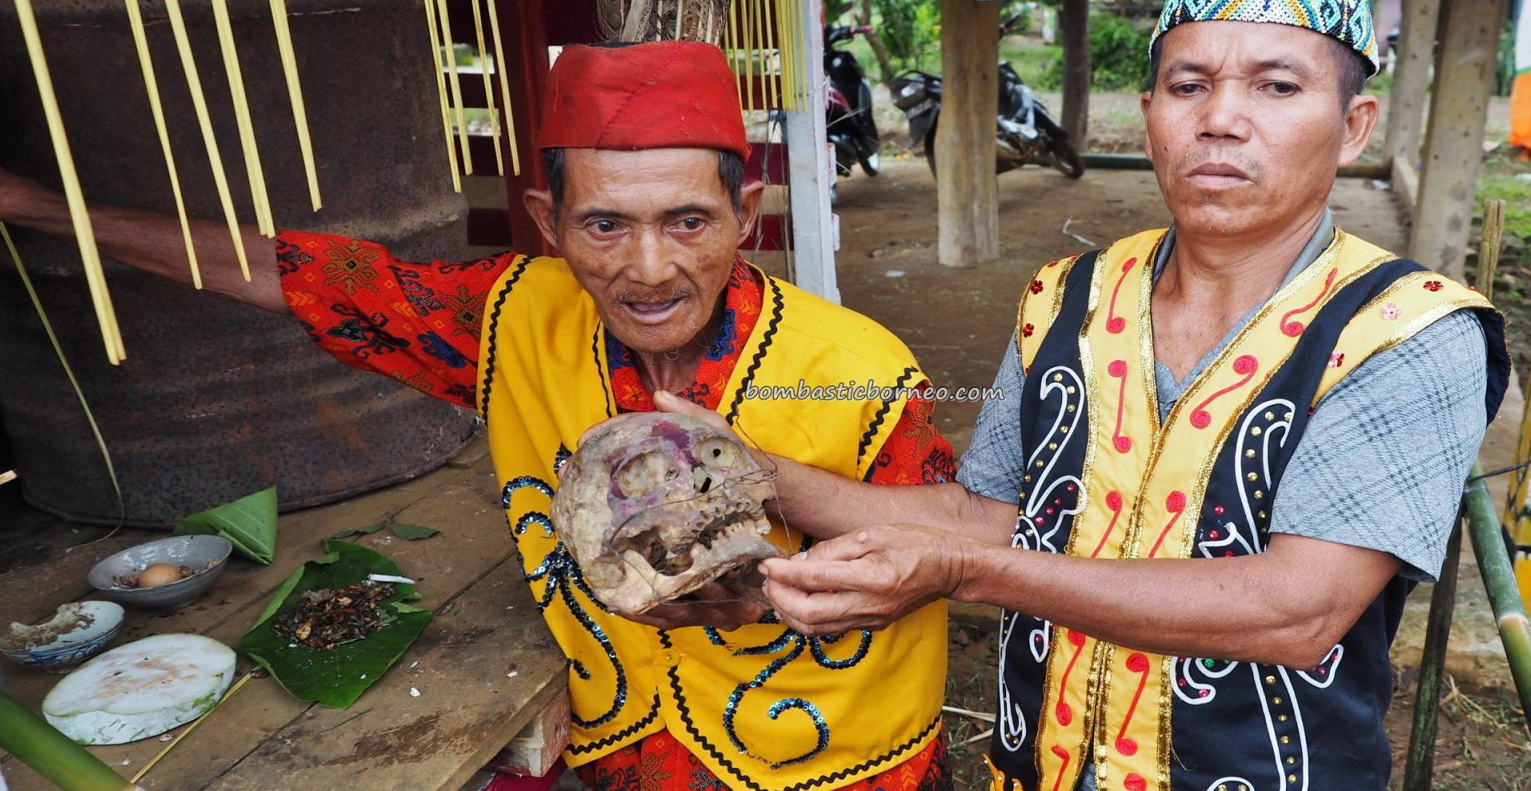 authentic village, traditional, culture, ritual, skull cleansing, feeding, Borneo, West Kalimantan, native, tribal, Tourism, tourist attraction, travel guide, transborder, 婆罗洲西加里曼丹, 原住民丰收节日